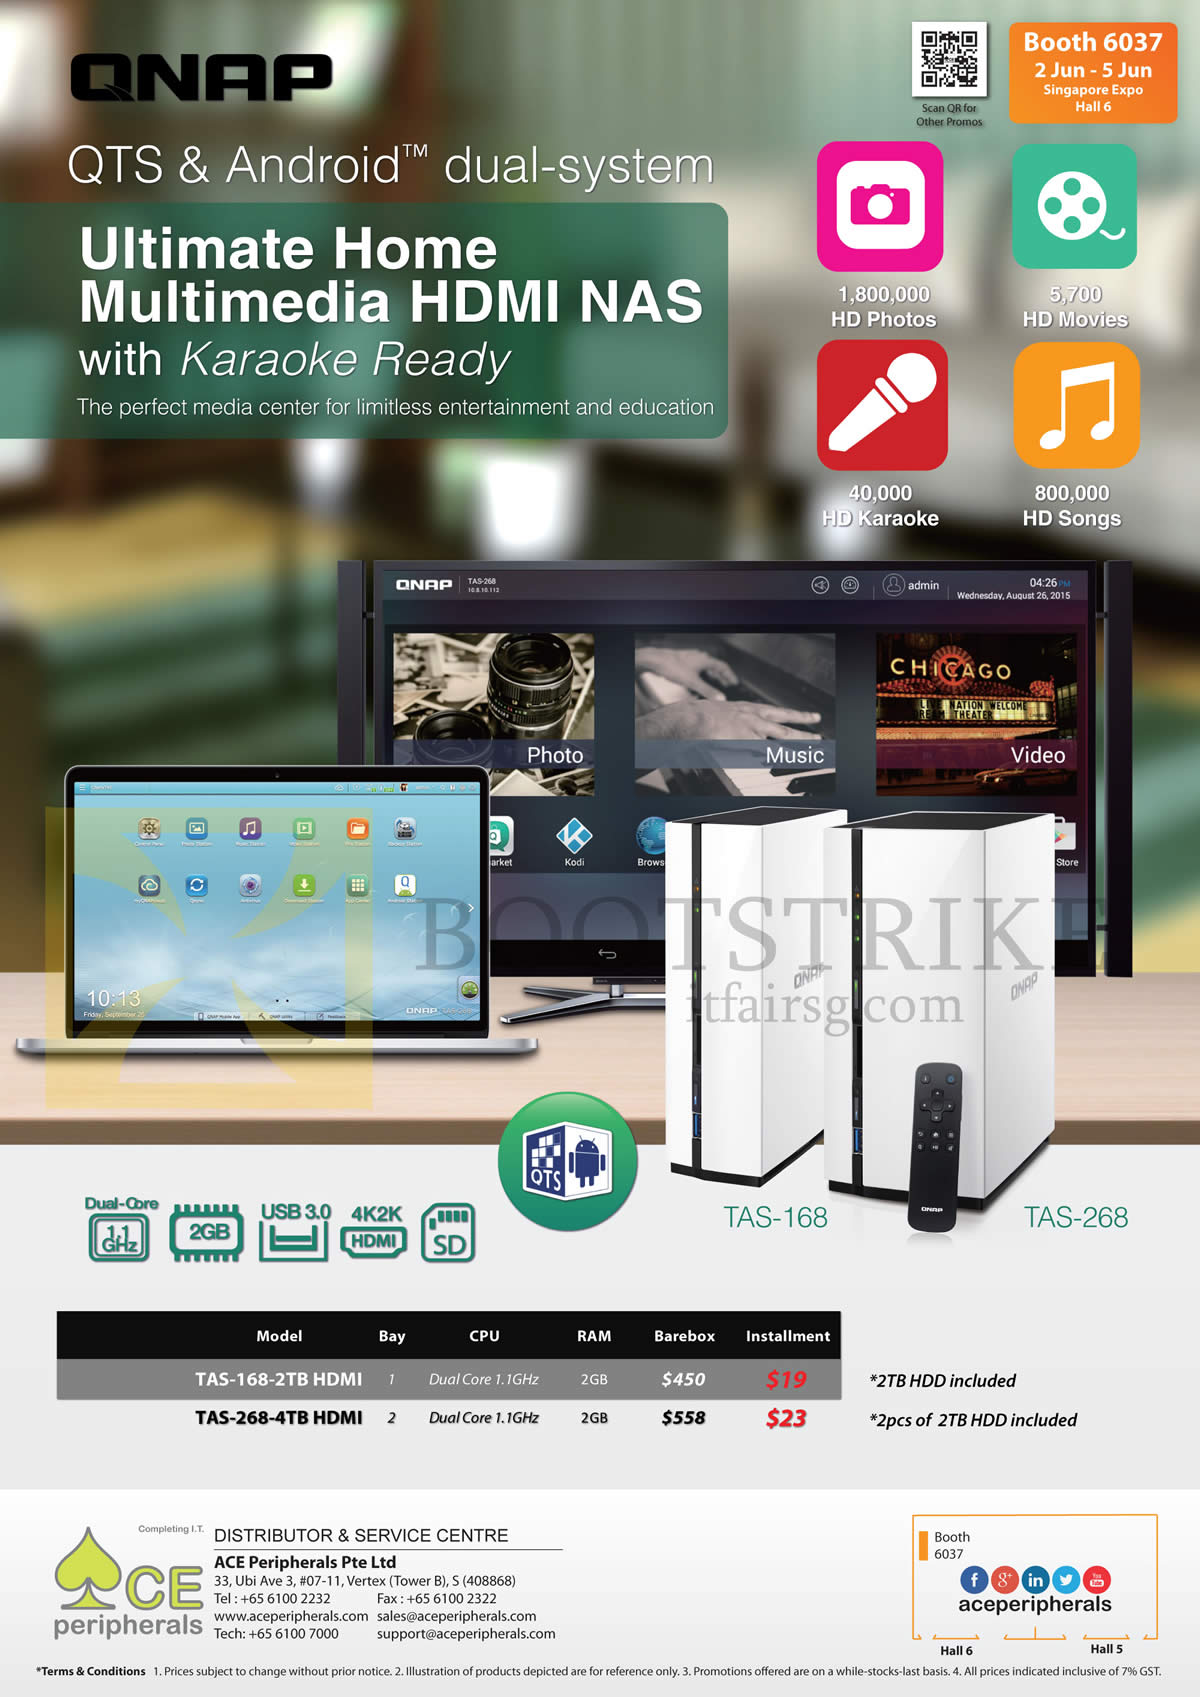 PC SHOW 2016 price list image brochure of ACE Peripherals QNAP Android Home Multimedia HDMI NAS TAS-168, TAS-268